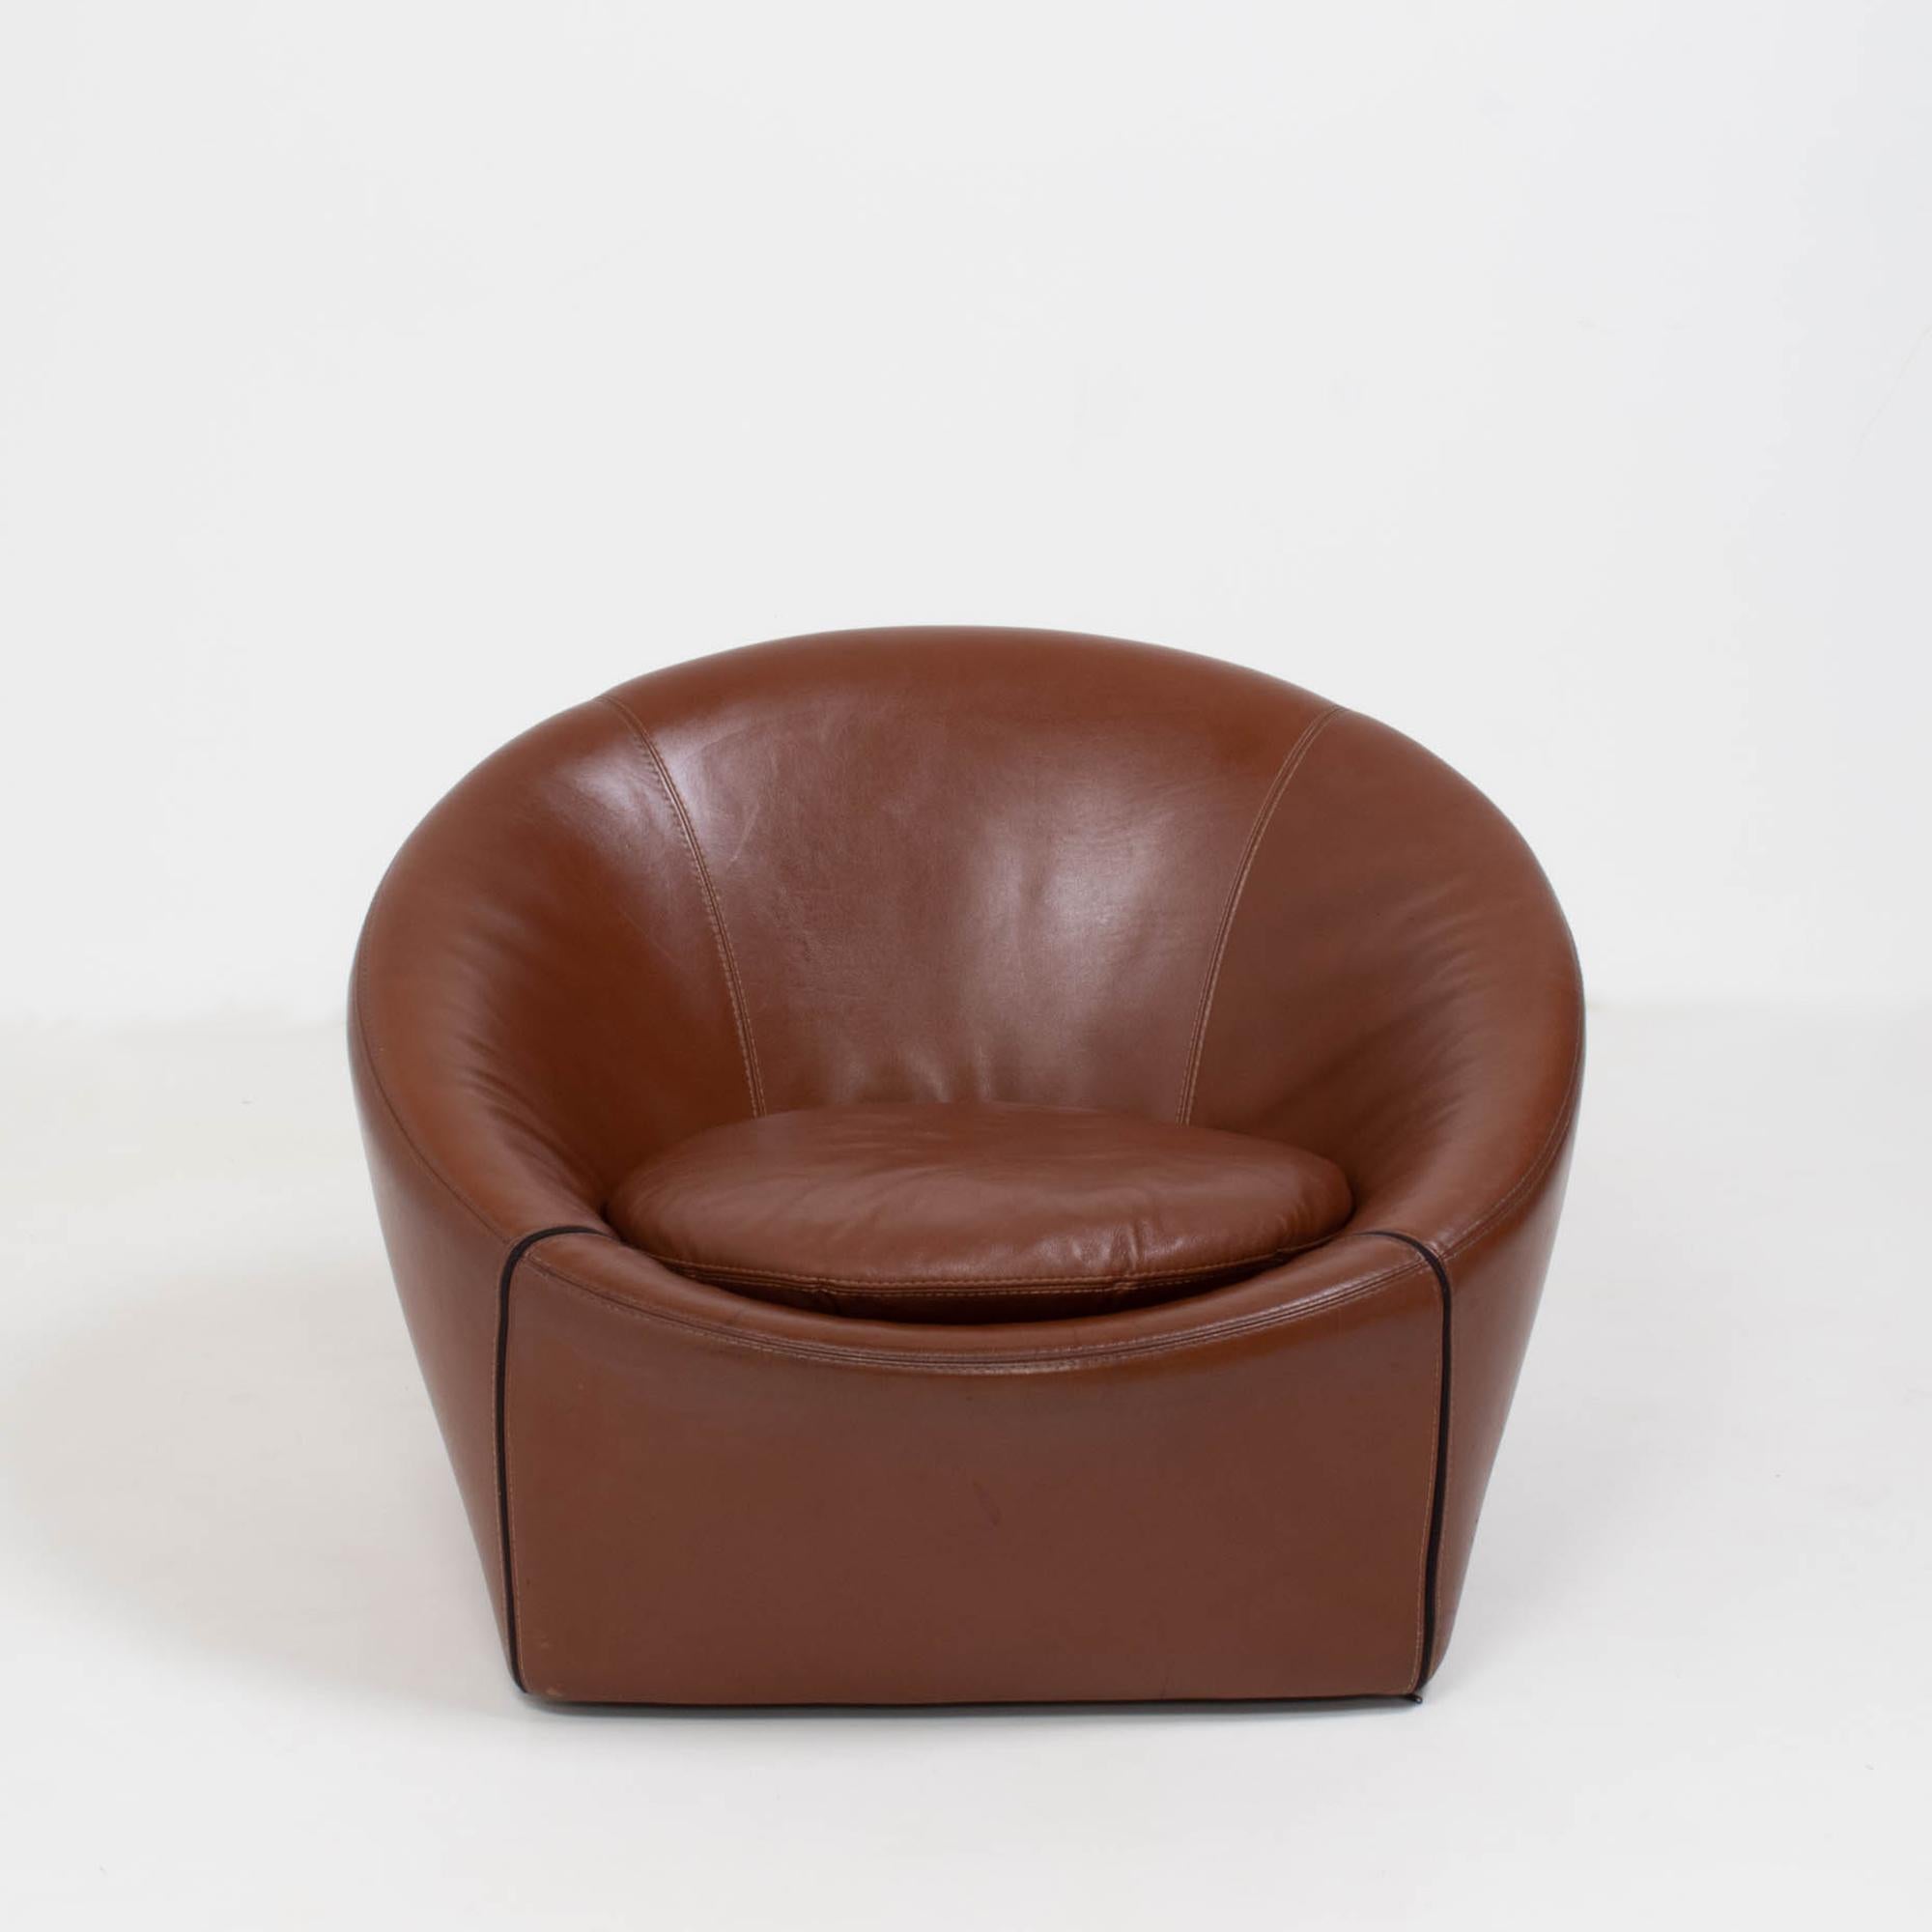 Designed by Gordon Guillaumier for Minotti in 2005, the Capri lounge chair perfectly balances style and comfort.

The tub style armchair is fully upholstered in brown leather and the covers can be removed with the exposed zip detailing.

A